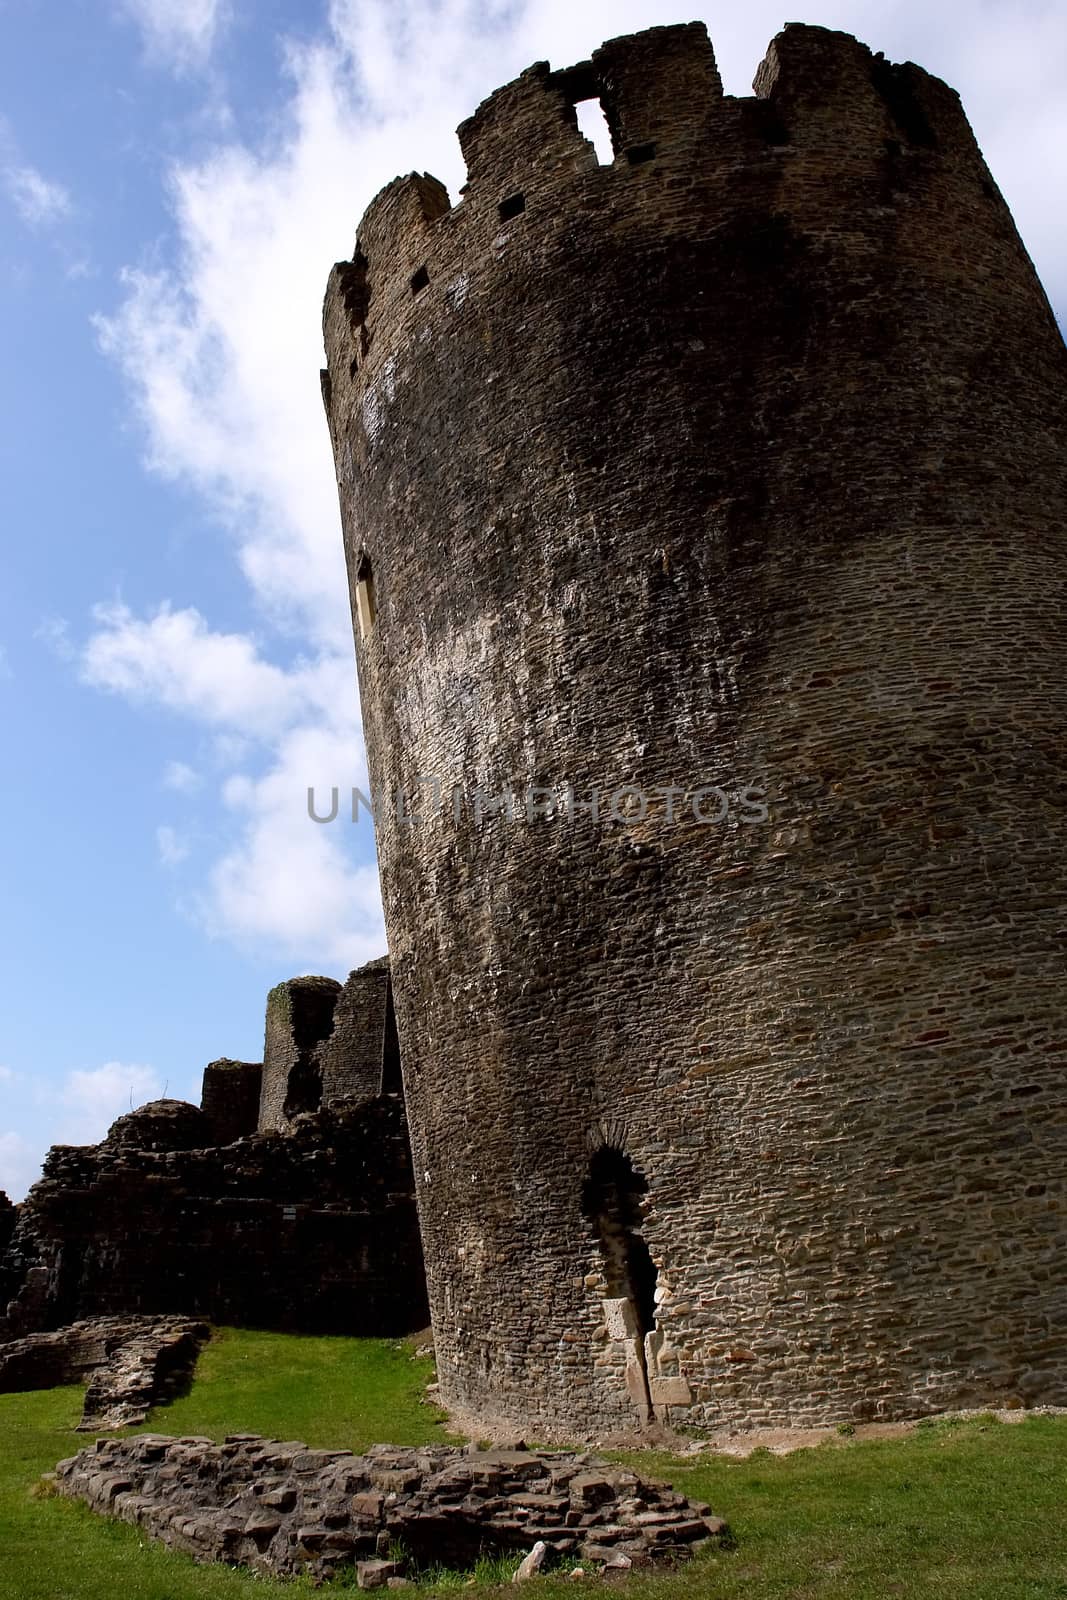  Ruins of Caerphilly Castle, Wales by ptxgarfield